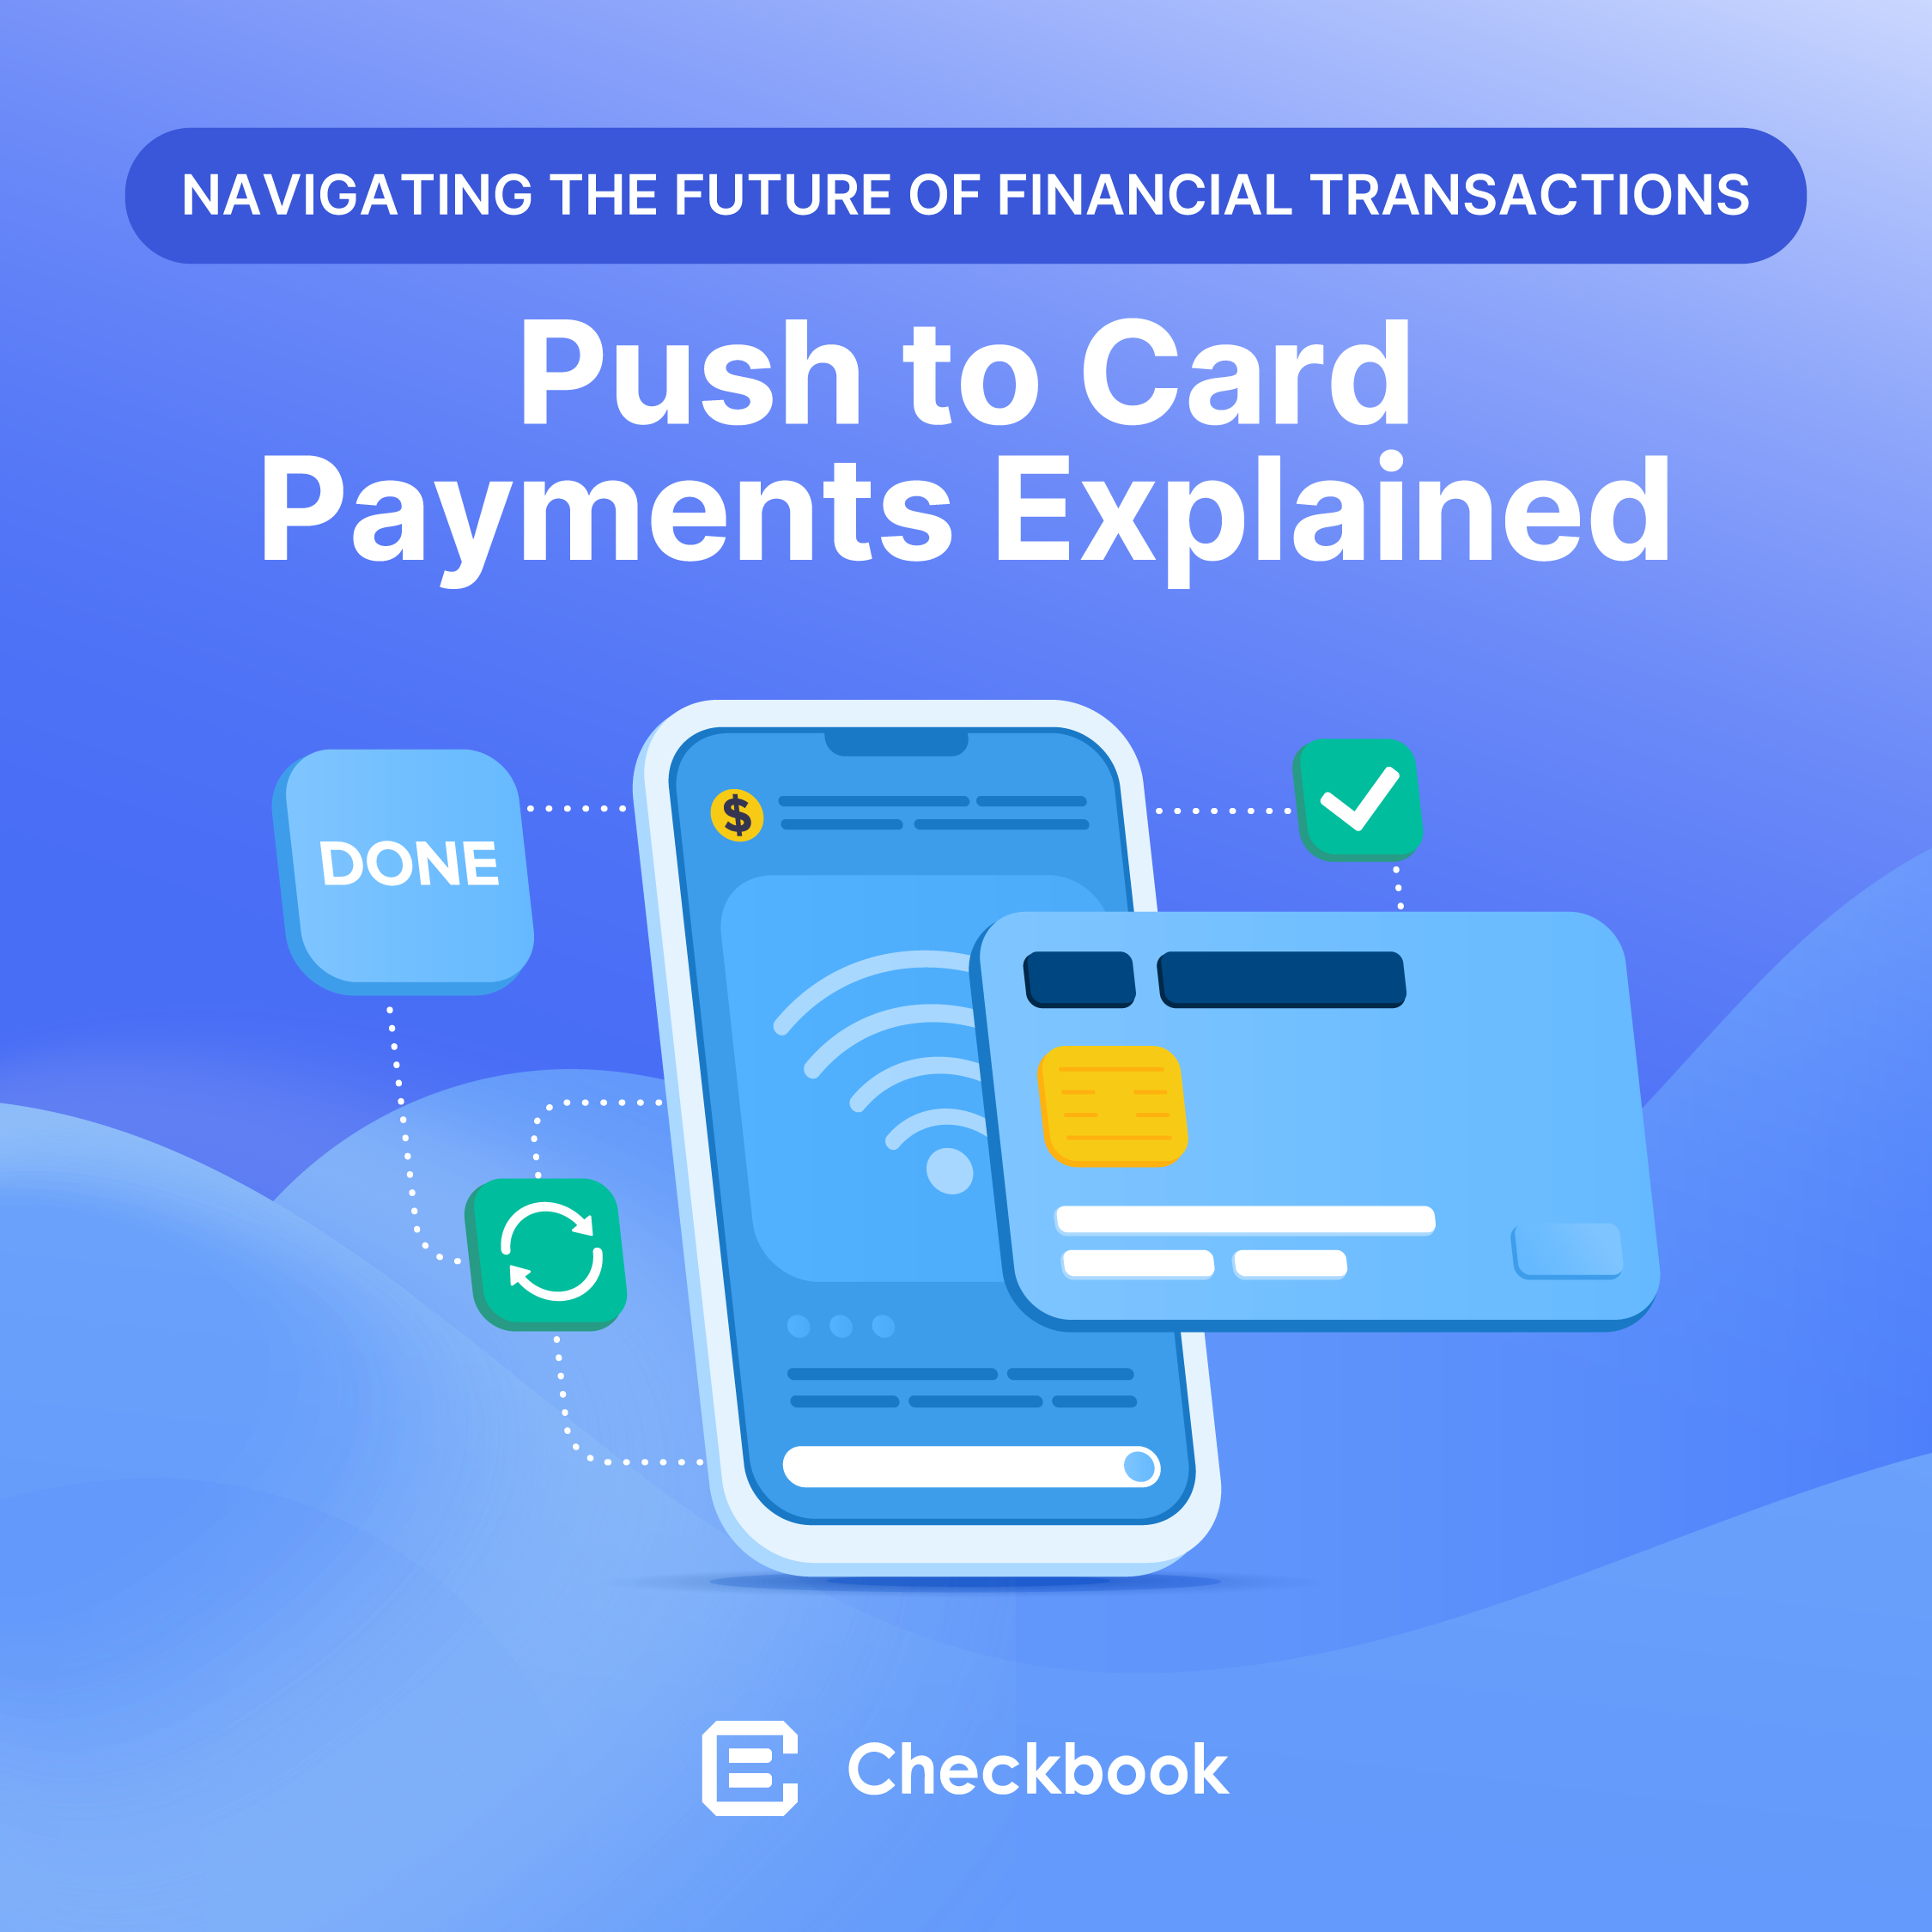 Push to Card Payments Explained